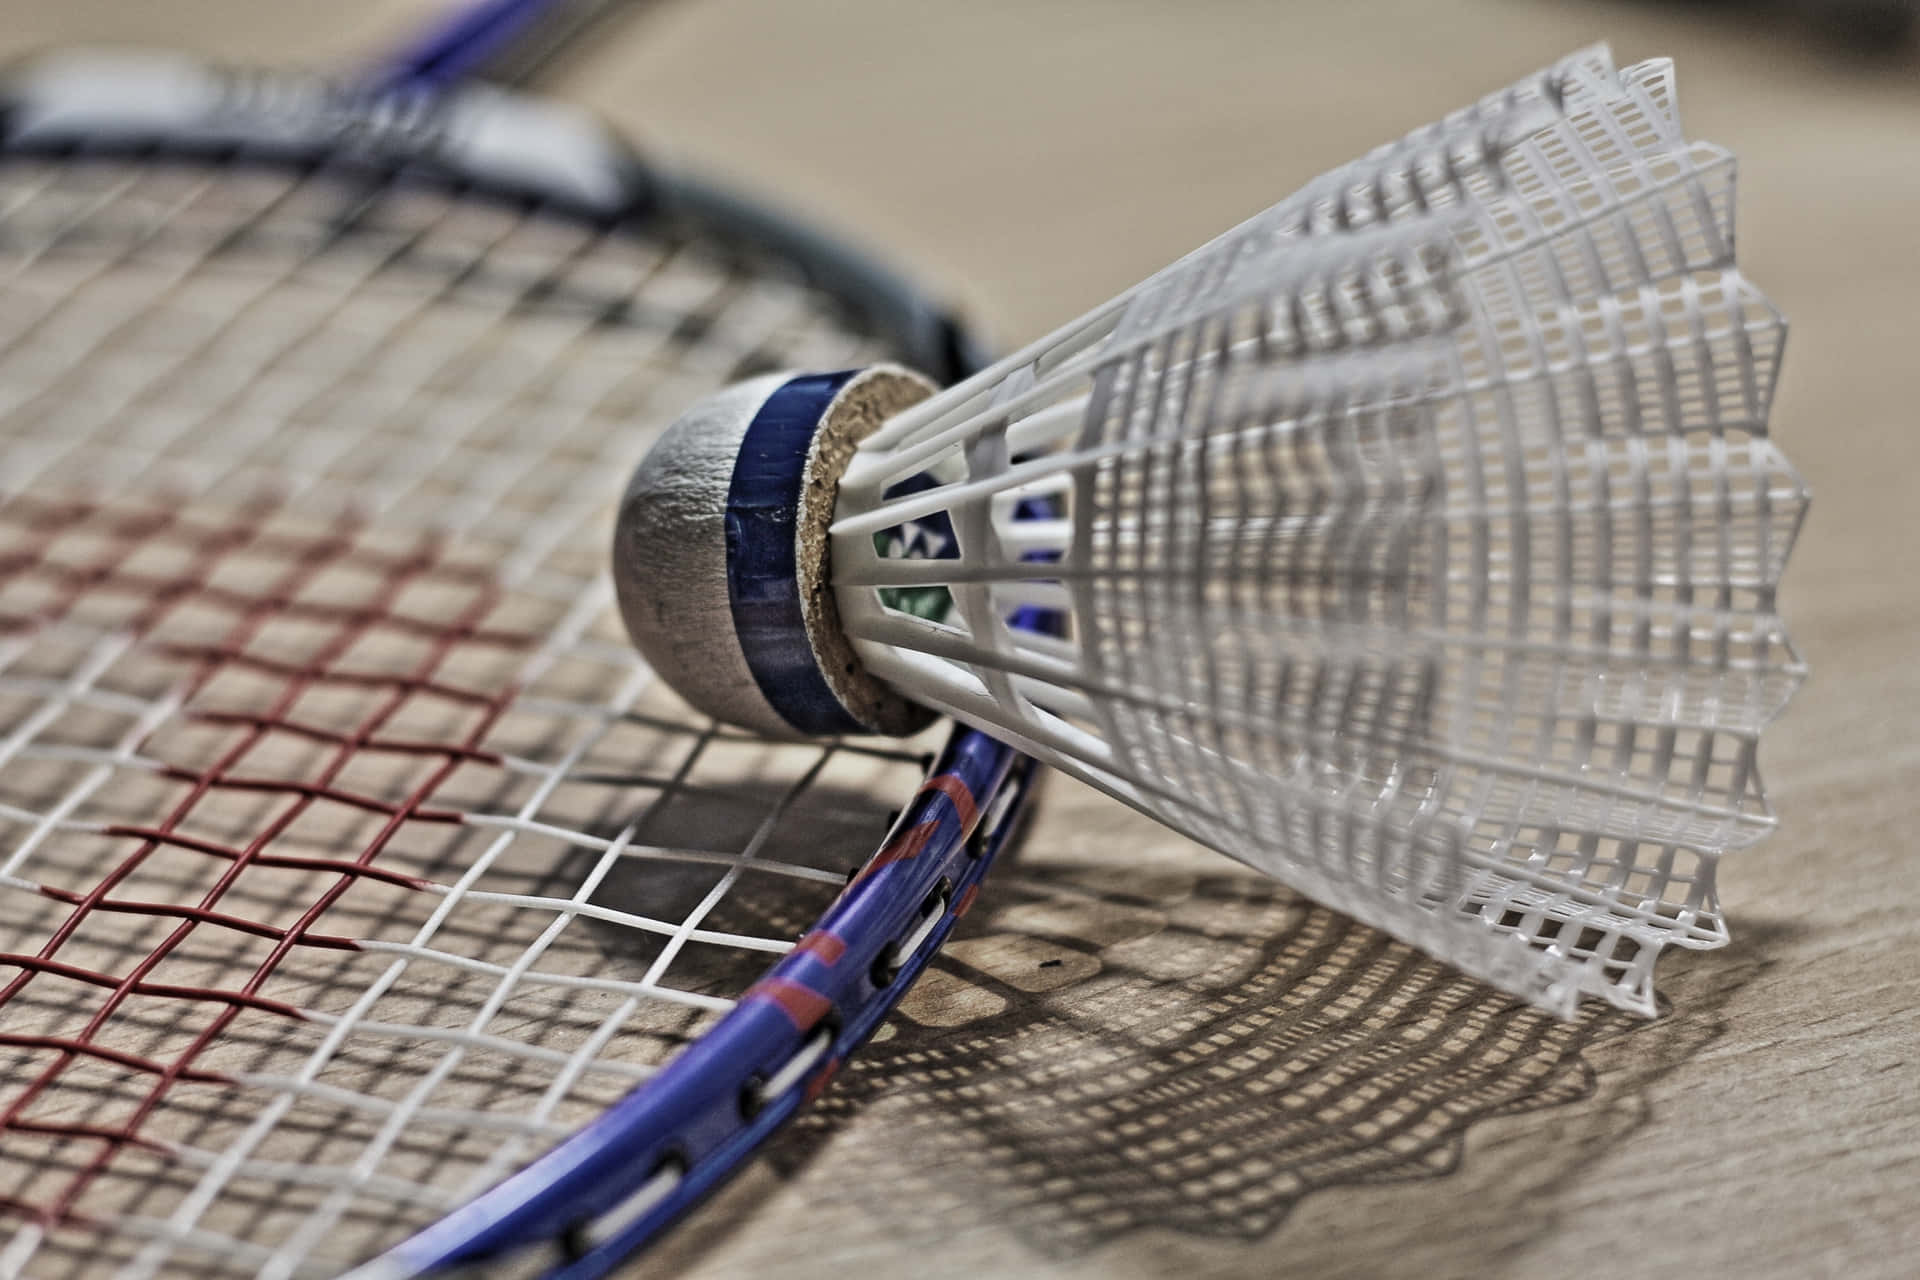 Unleash your badminton skills to the fullest on this HD badminton court